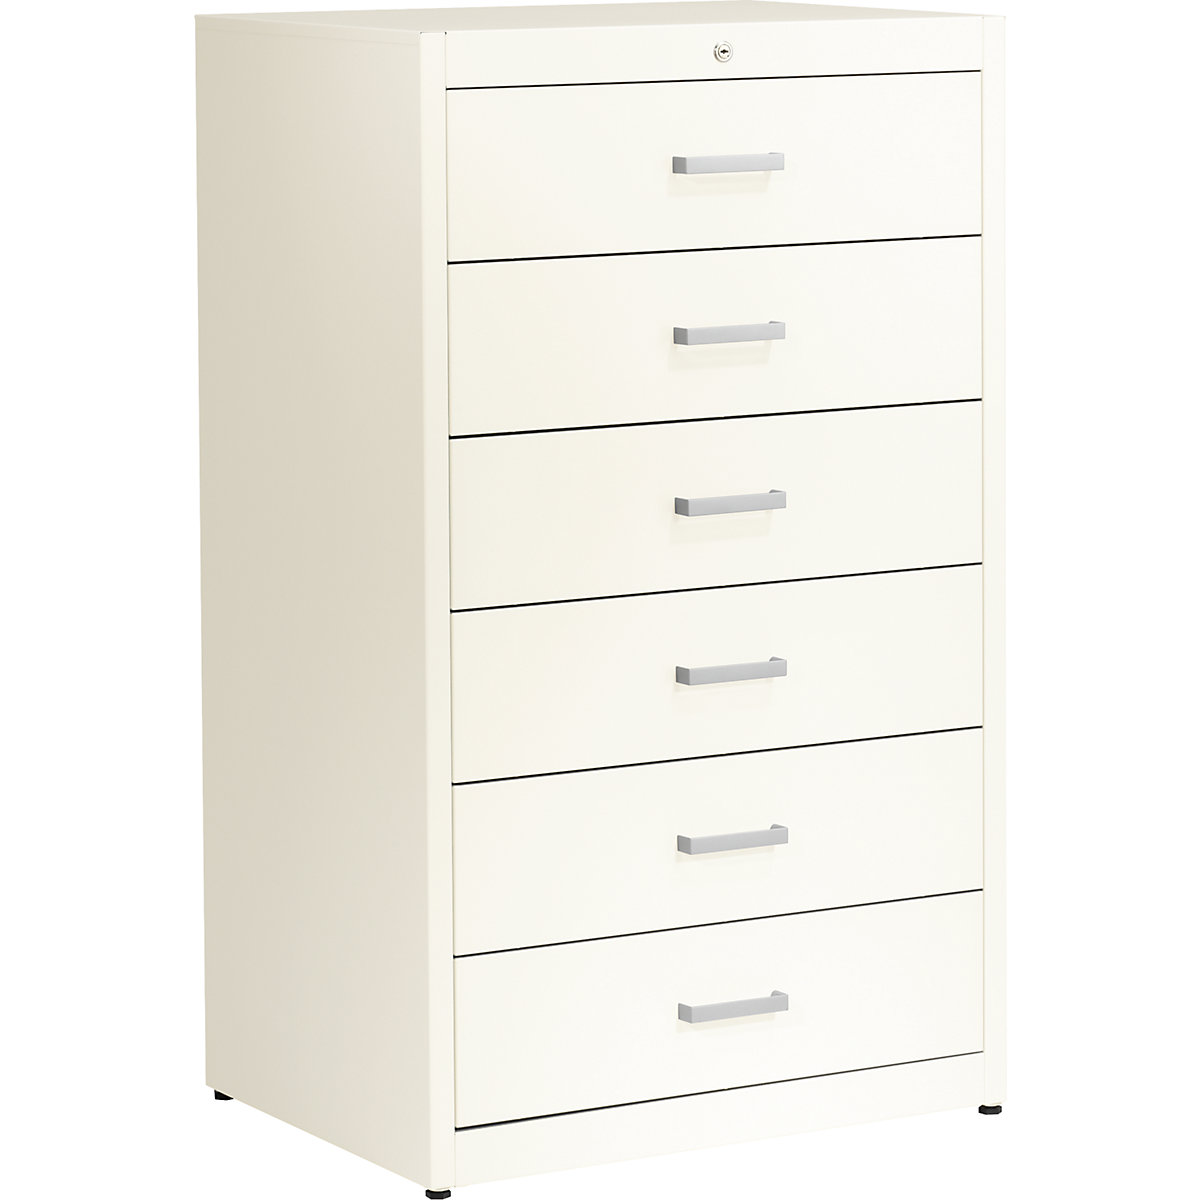 Card file cabinet, bar handles – mauser, 6 drawers, soft retraction mechanism, 3-track, pure white-6